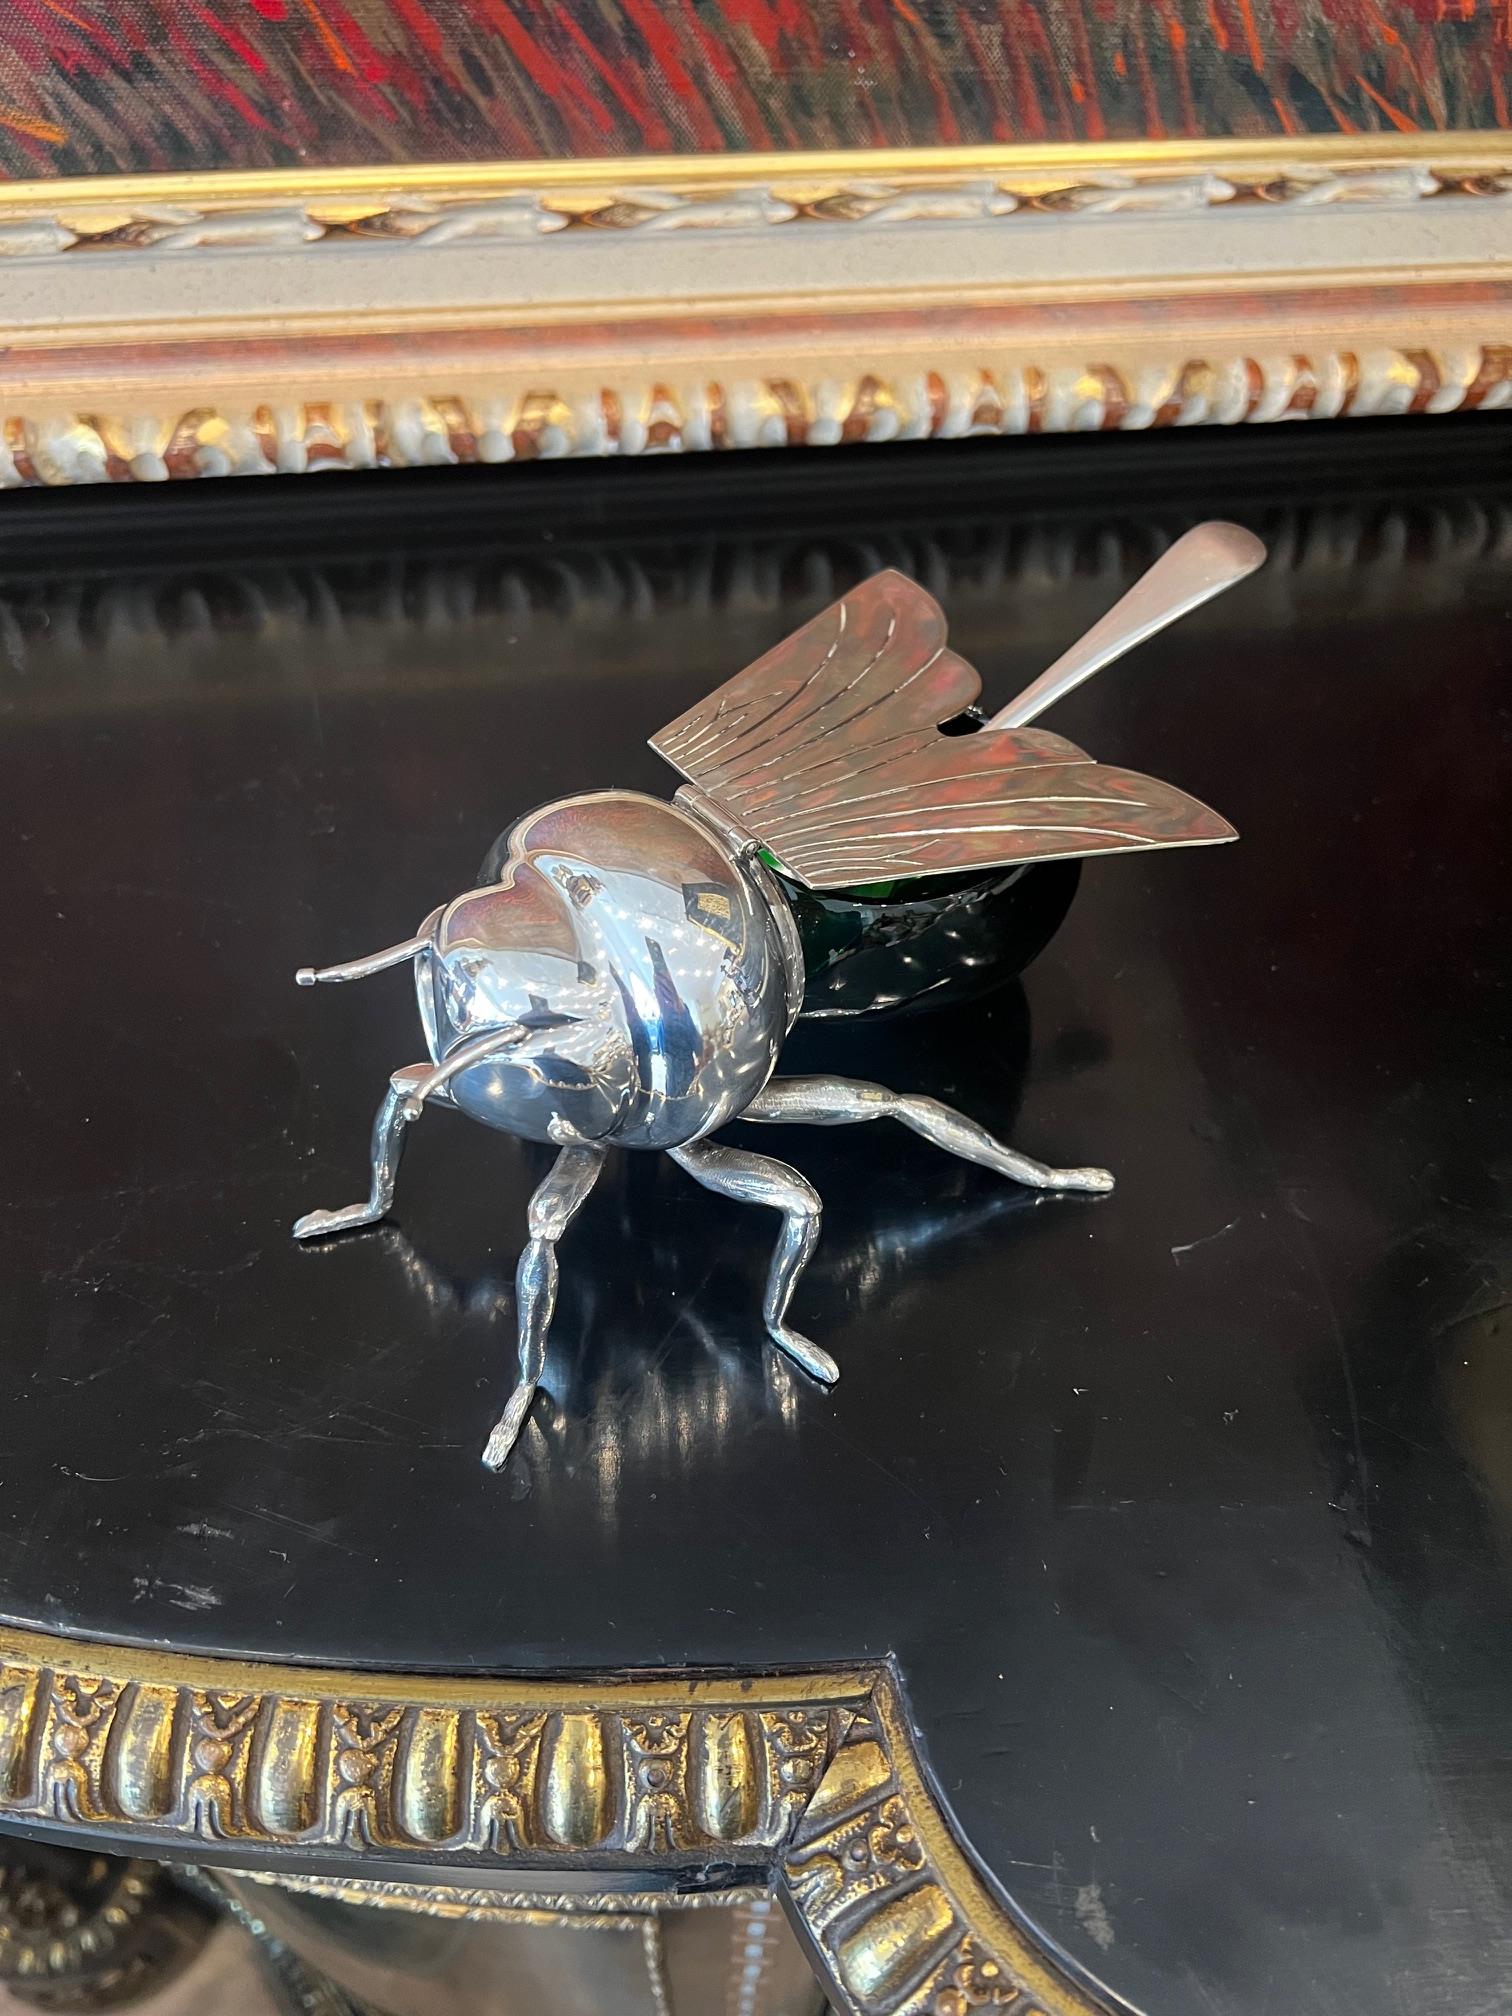 A RARE ART DECO SILVER PLATED AND GREEN GLASS BEE HONEY POT AND SPOON, C. 1930 - Image 4 of 7